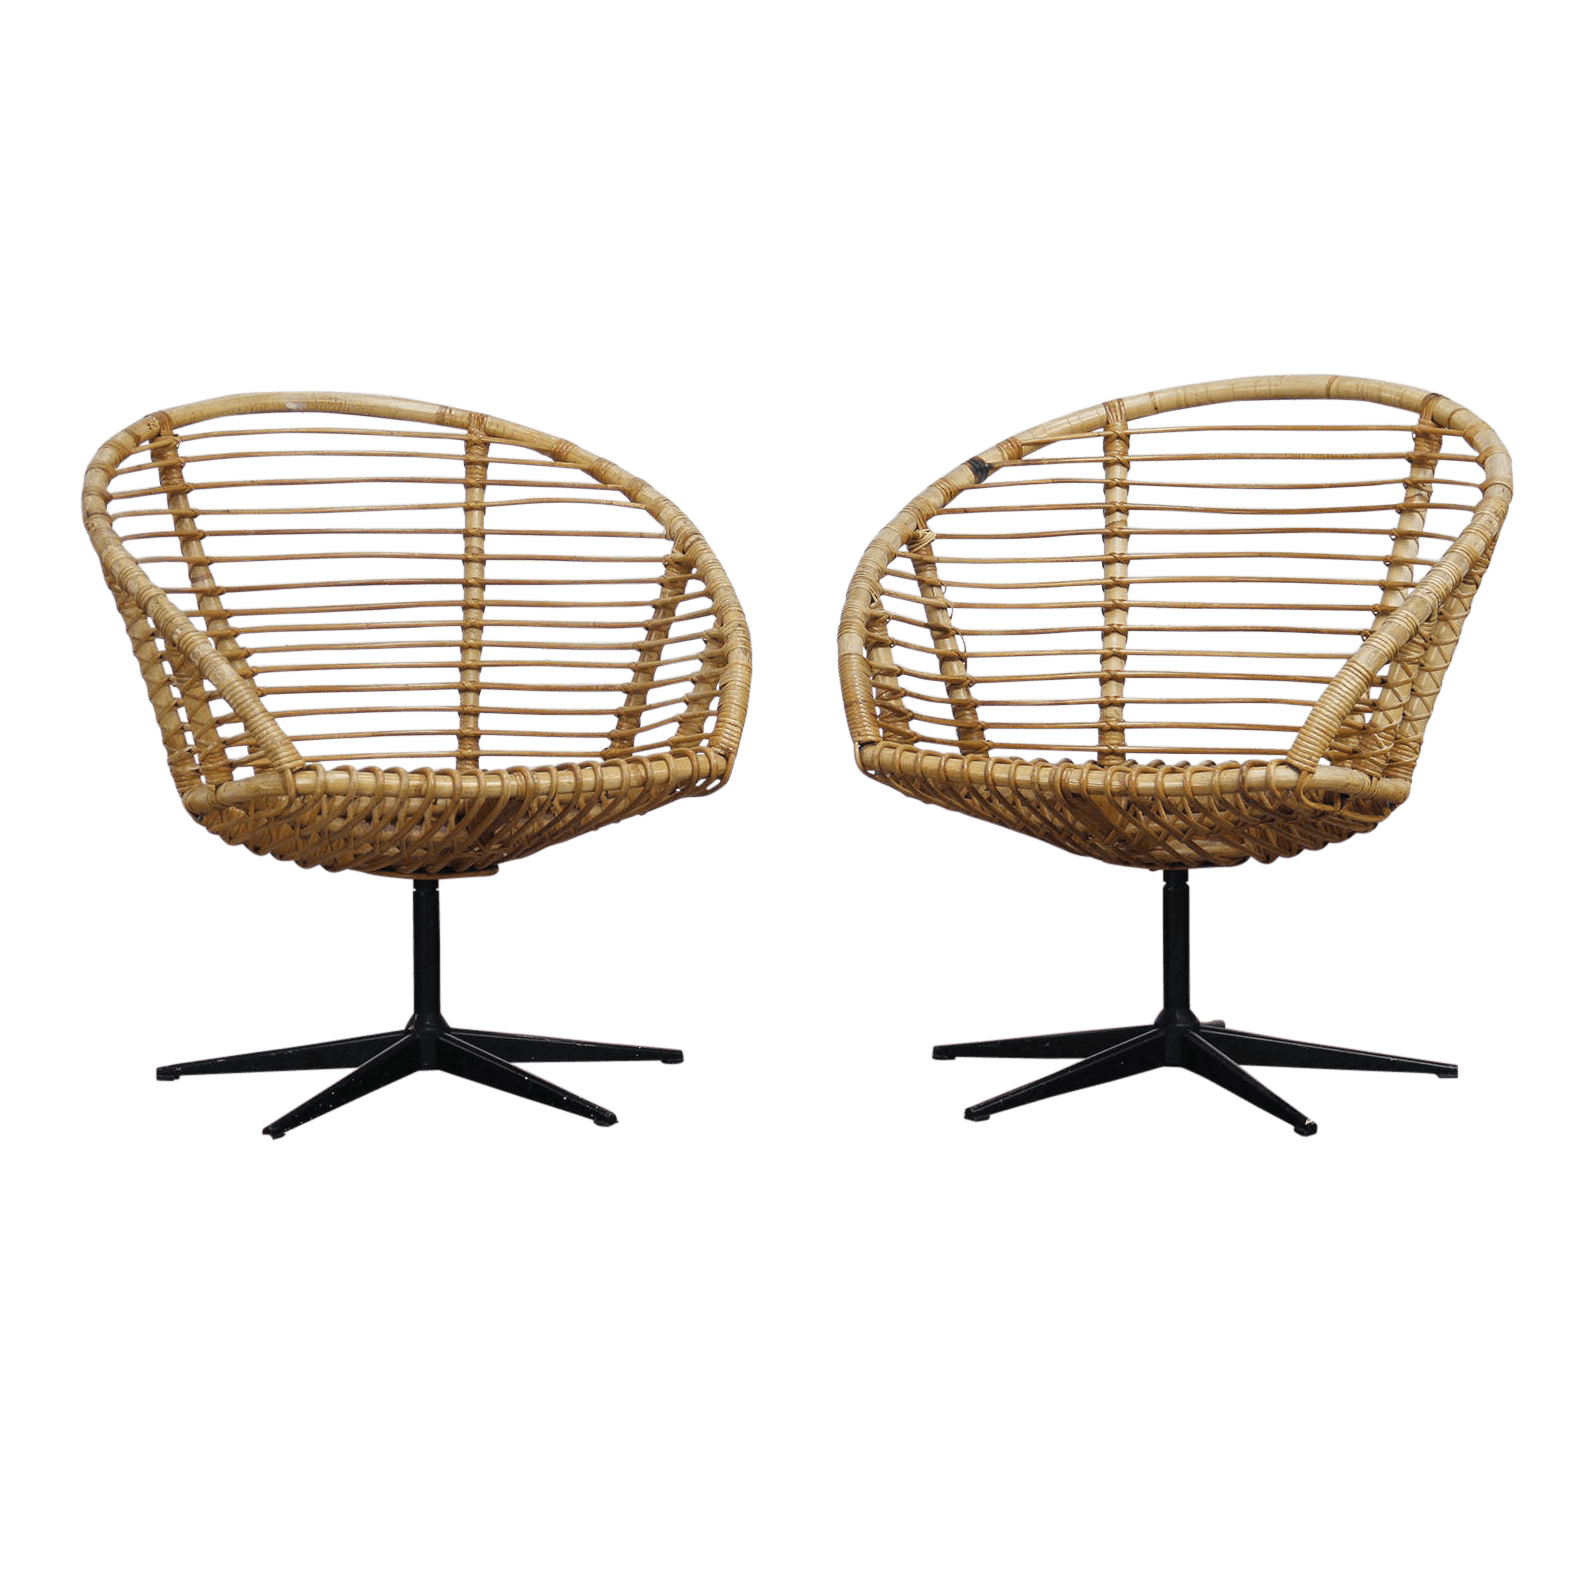 Basket Chair Download HQ PNG PNG Image